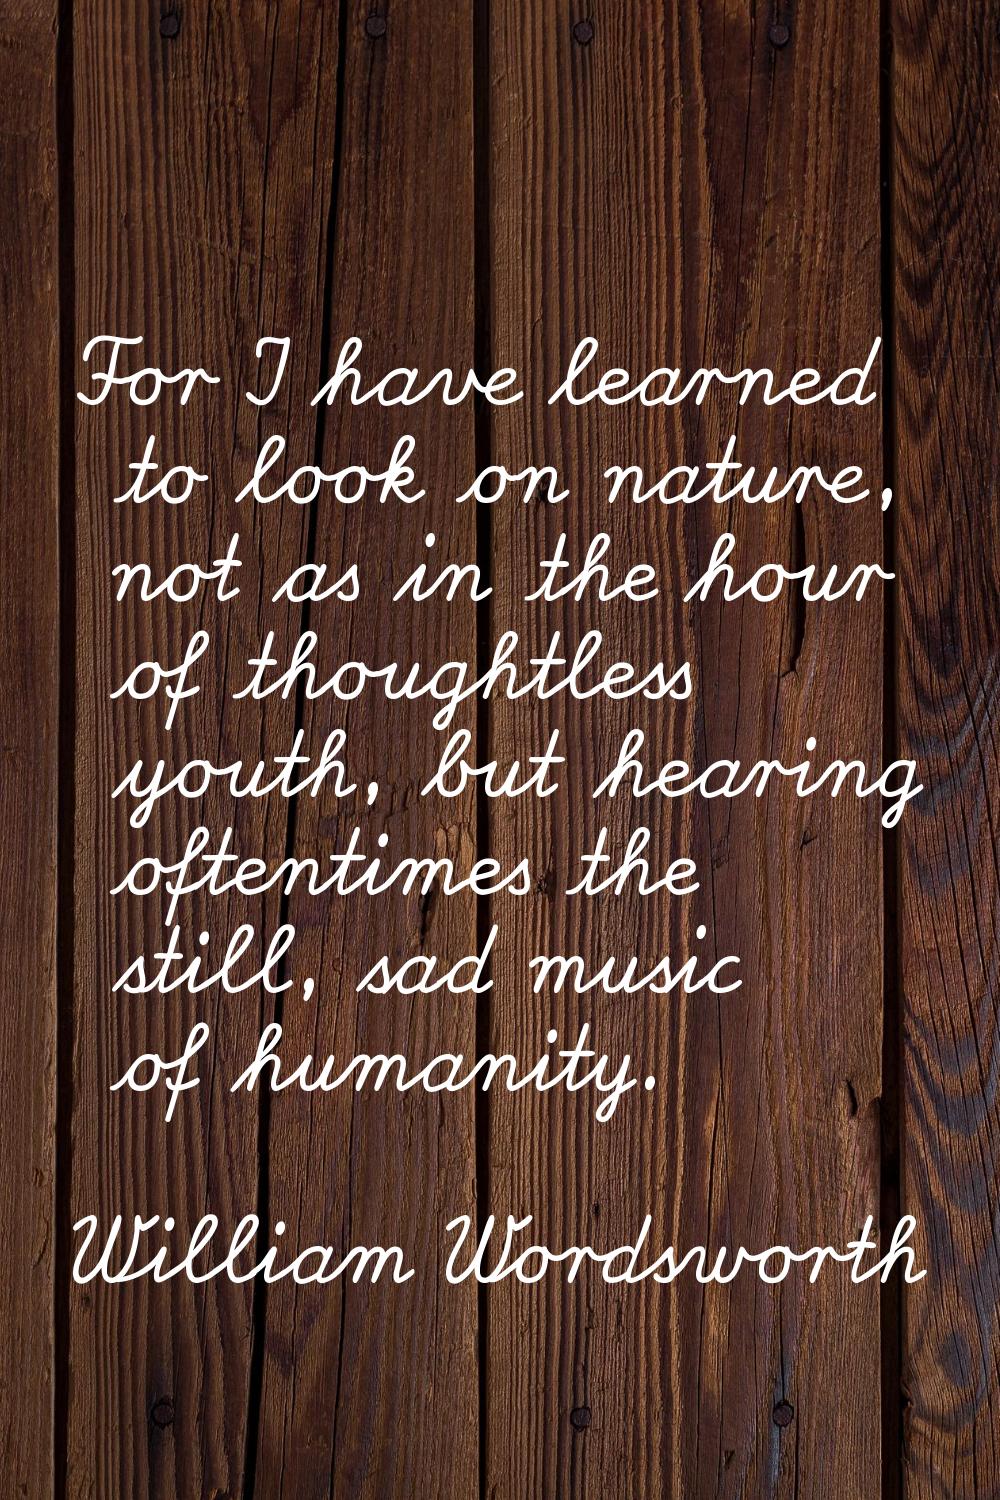 For I have learned to look on nature, not as in the hour of thoughtless youth, but hearing oftentim